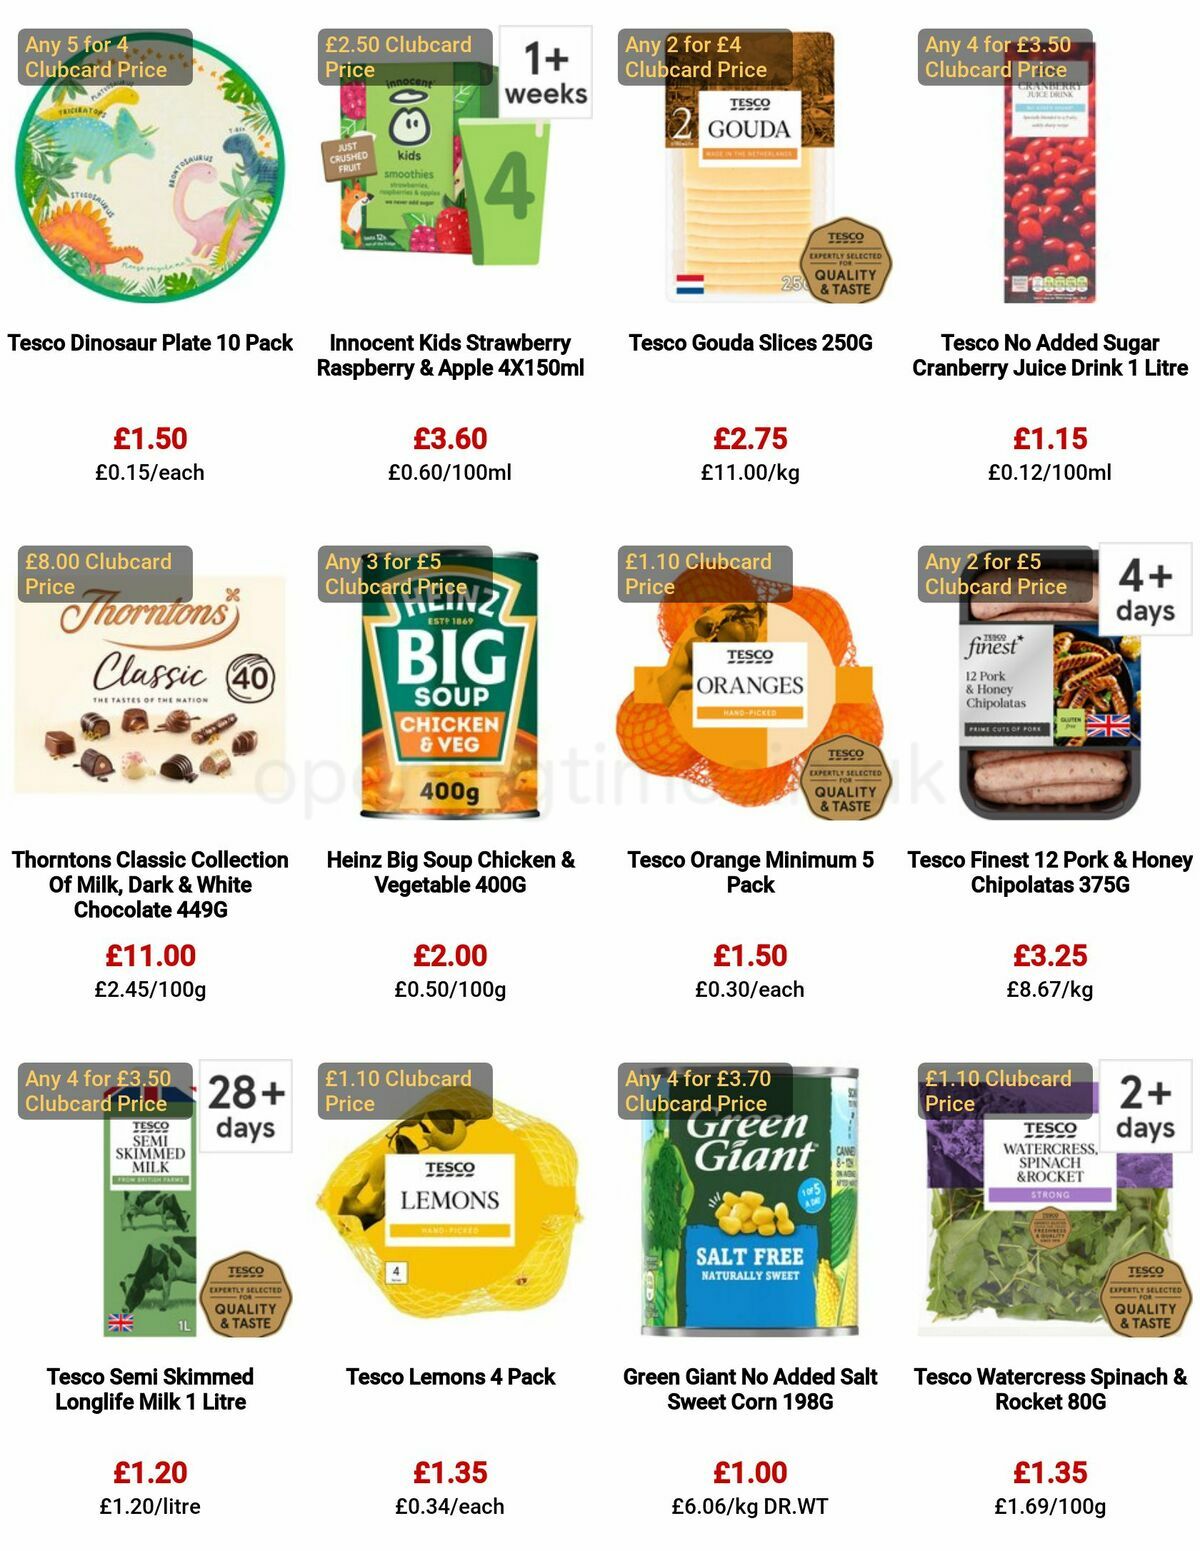 TESCO Offers from 8 June